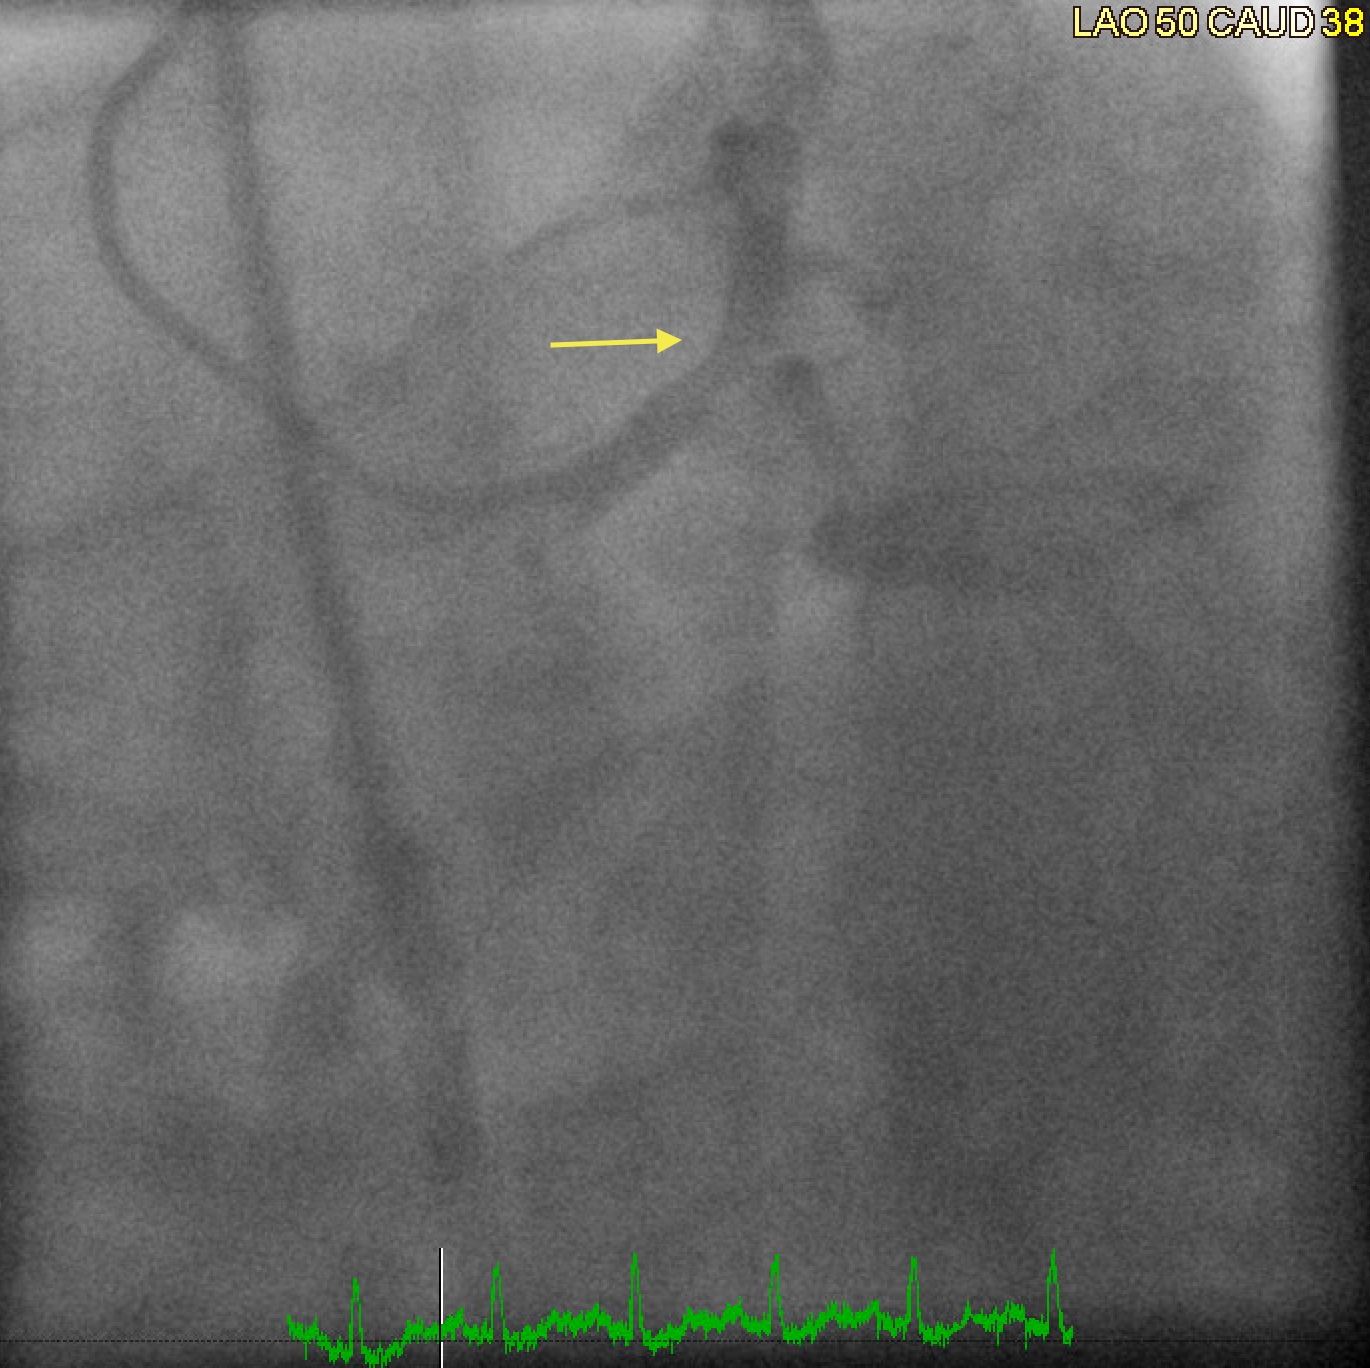 Coronary angiogram in a patient with radiation-induced coronary artery disease showing severe obstructive left main disease with bifurcation lesion affecting the Ostia of the left anterior descending artery and the left circumflex artery